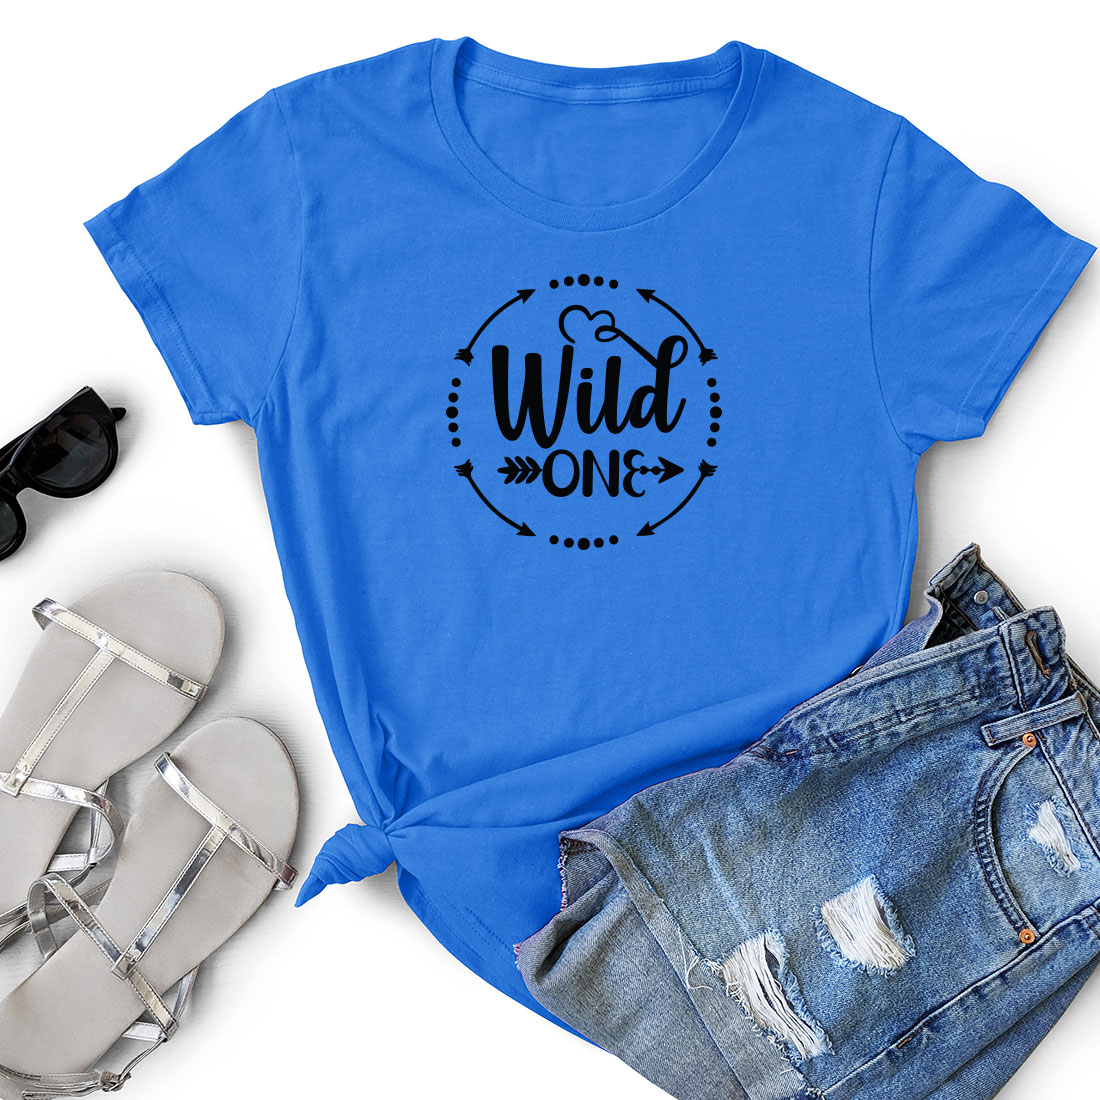 T - shirt that says wild one next to a pair of shorts.